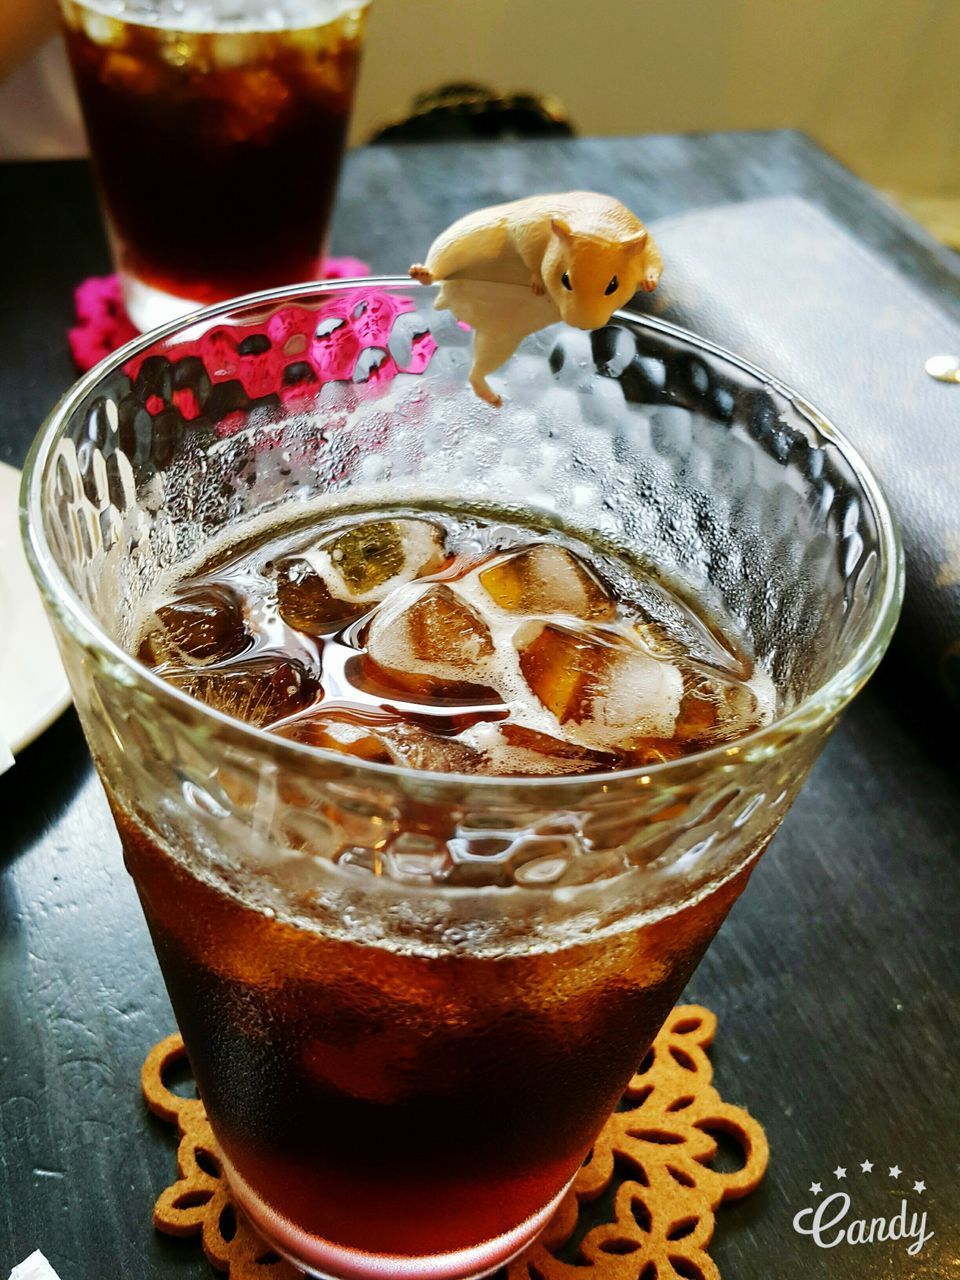 CLOSE-UP OF COCKTAIL ON TABLE